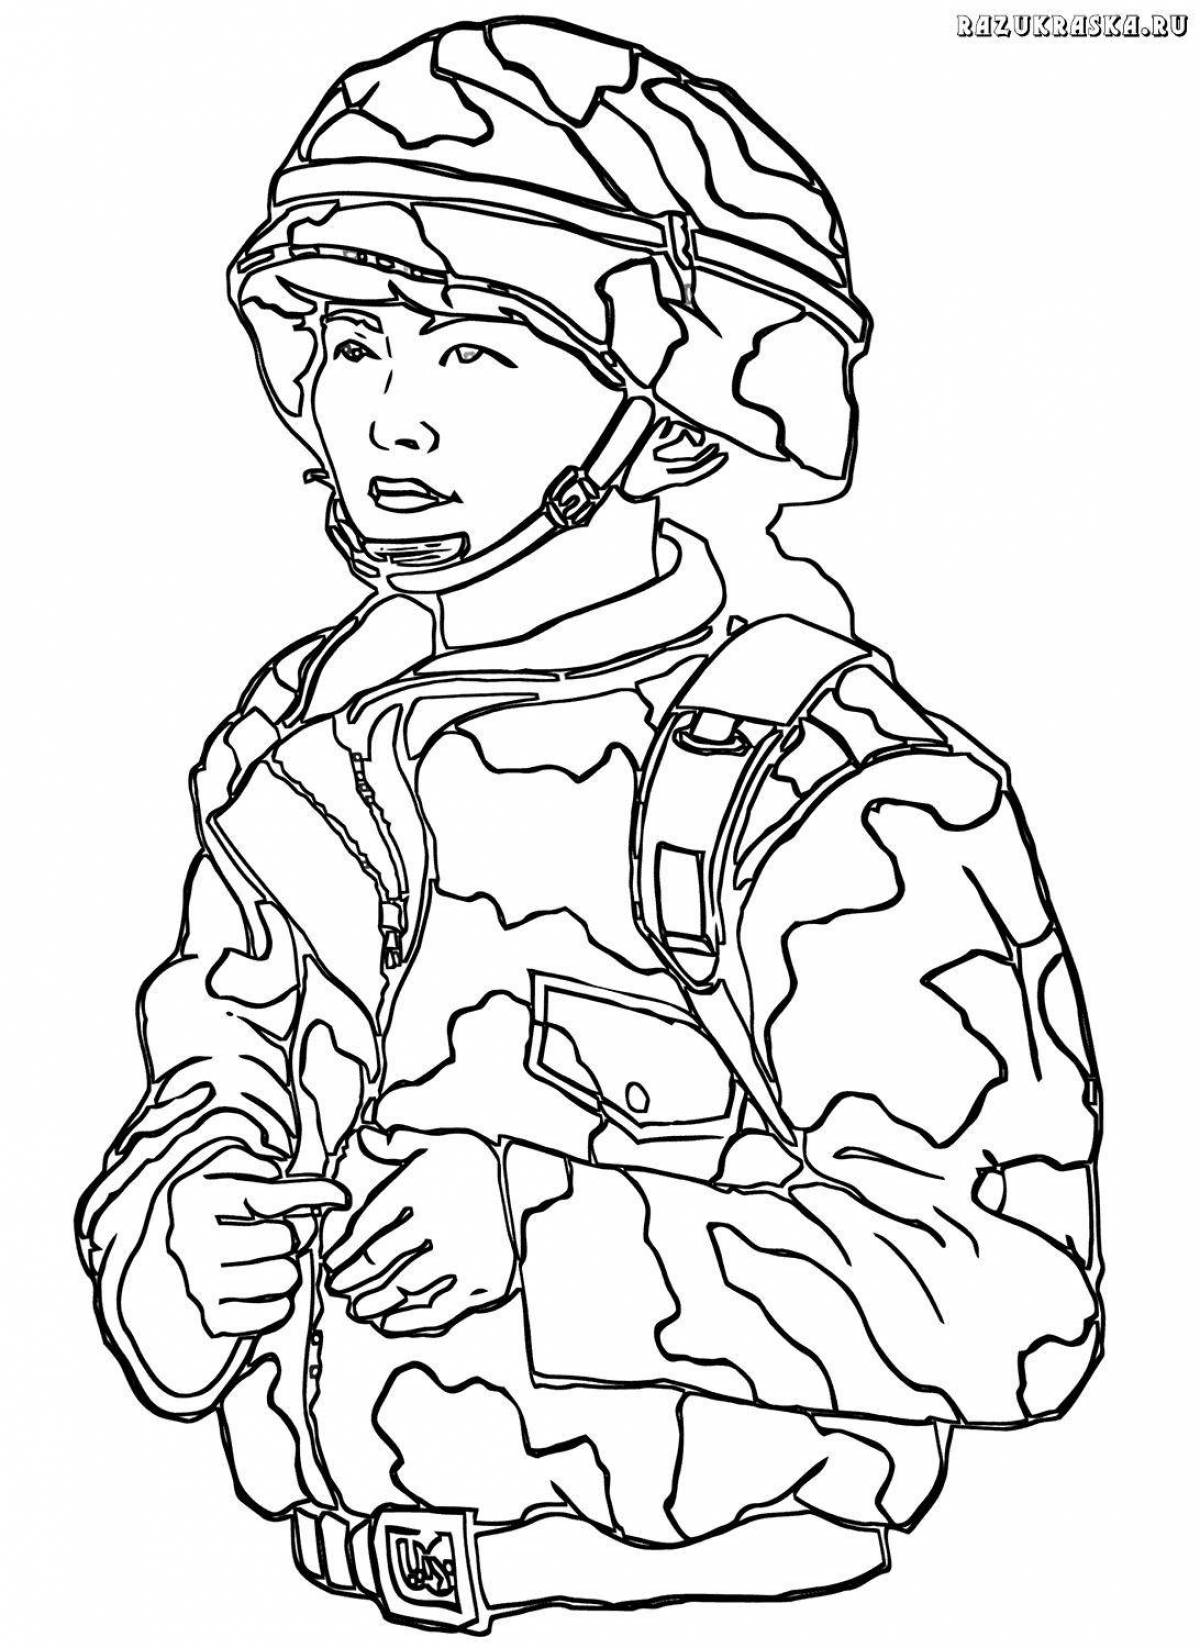 Dynamic combat faces coloring page